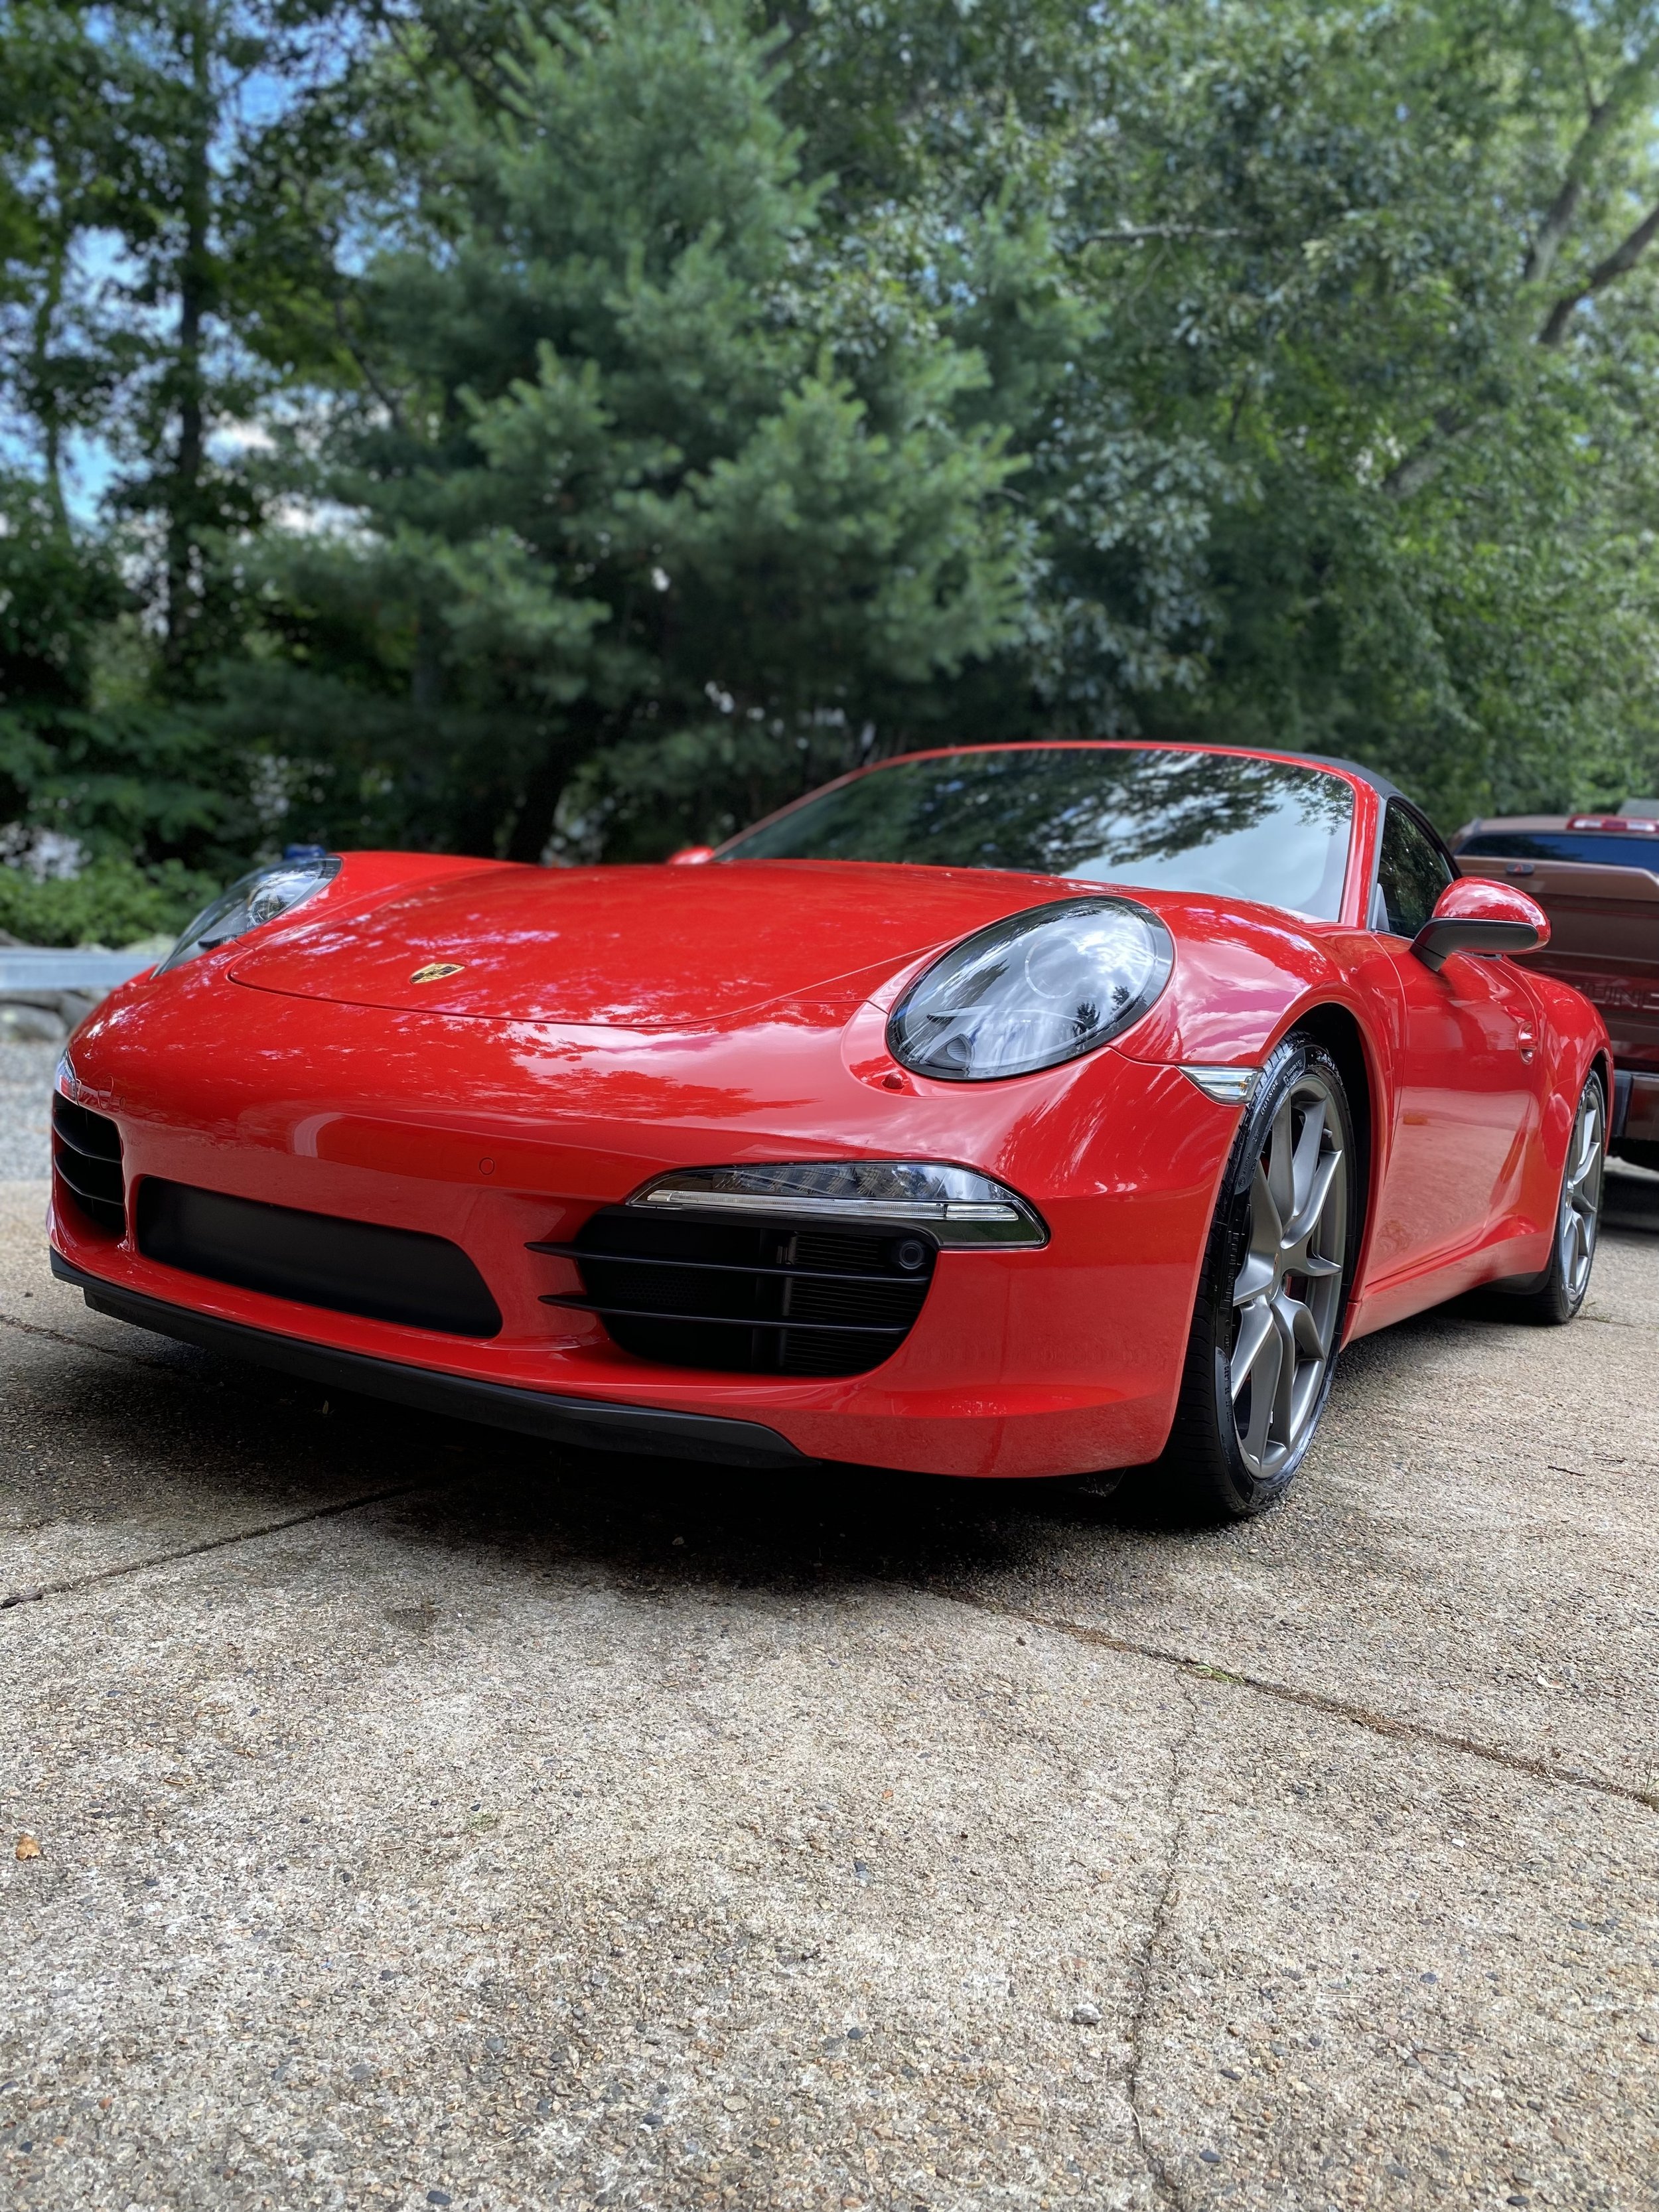 Mobile Car Detailing Services In Rhode Island - Jays Mobile Auto Detailing  — Jay's Mobile Auto Detail